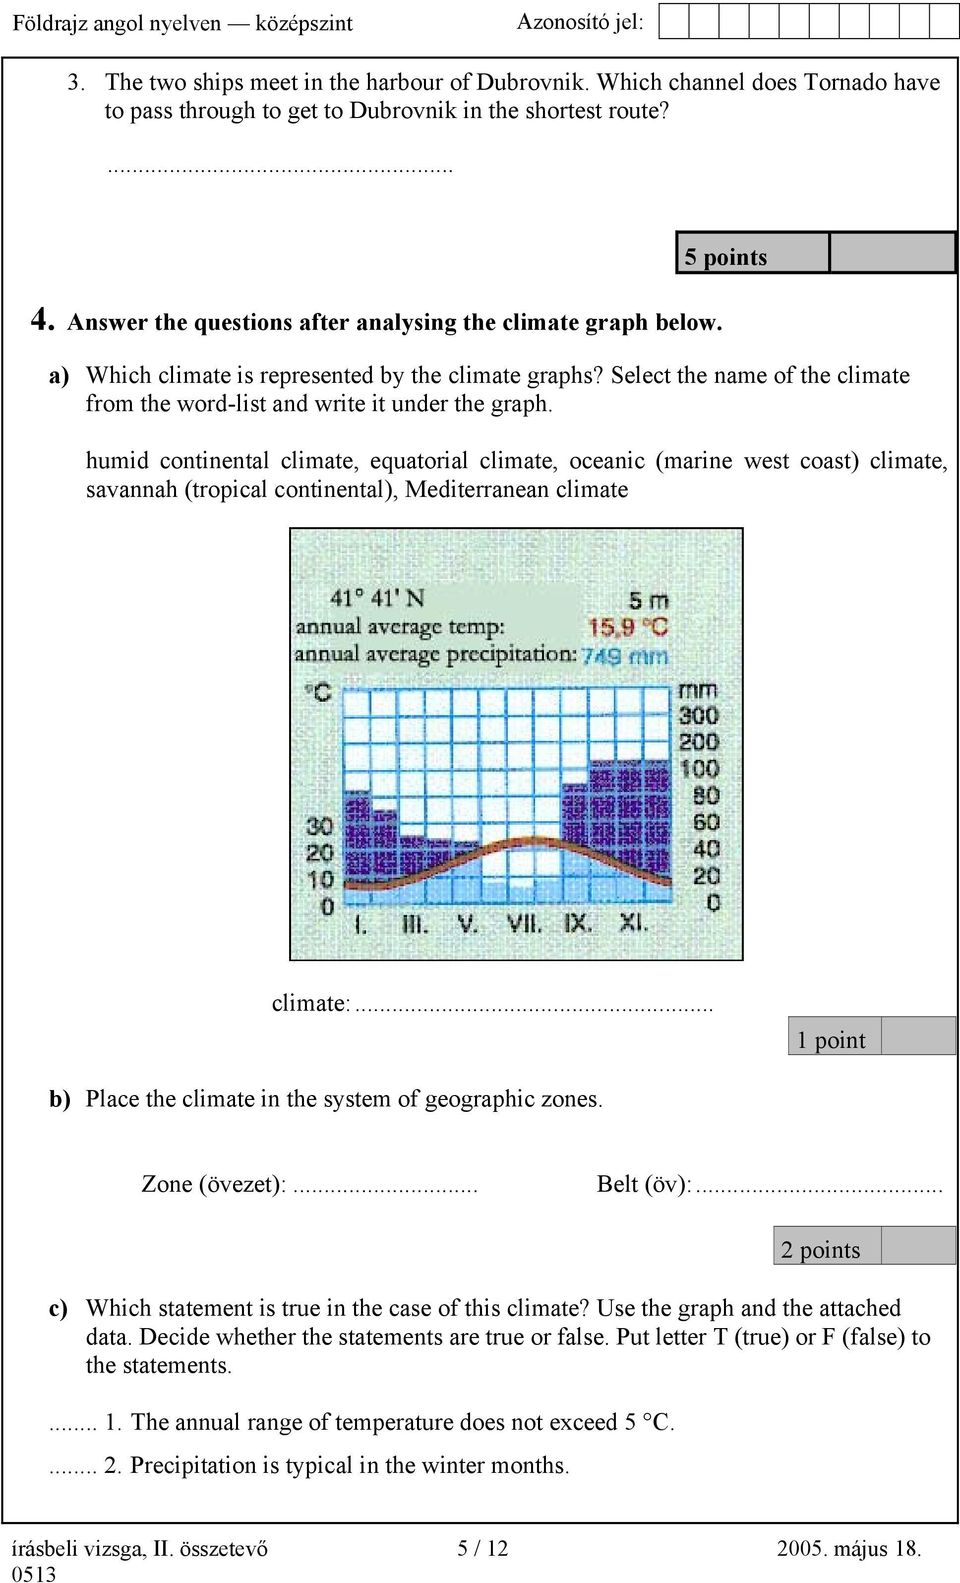 Select the name of the climate from the word-list and write it under the graph.